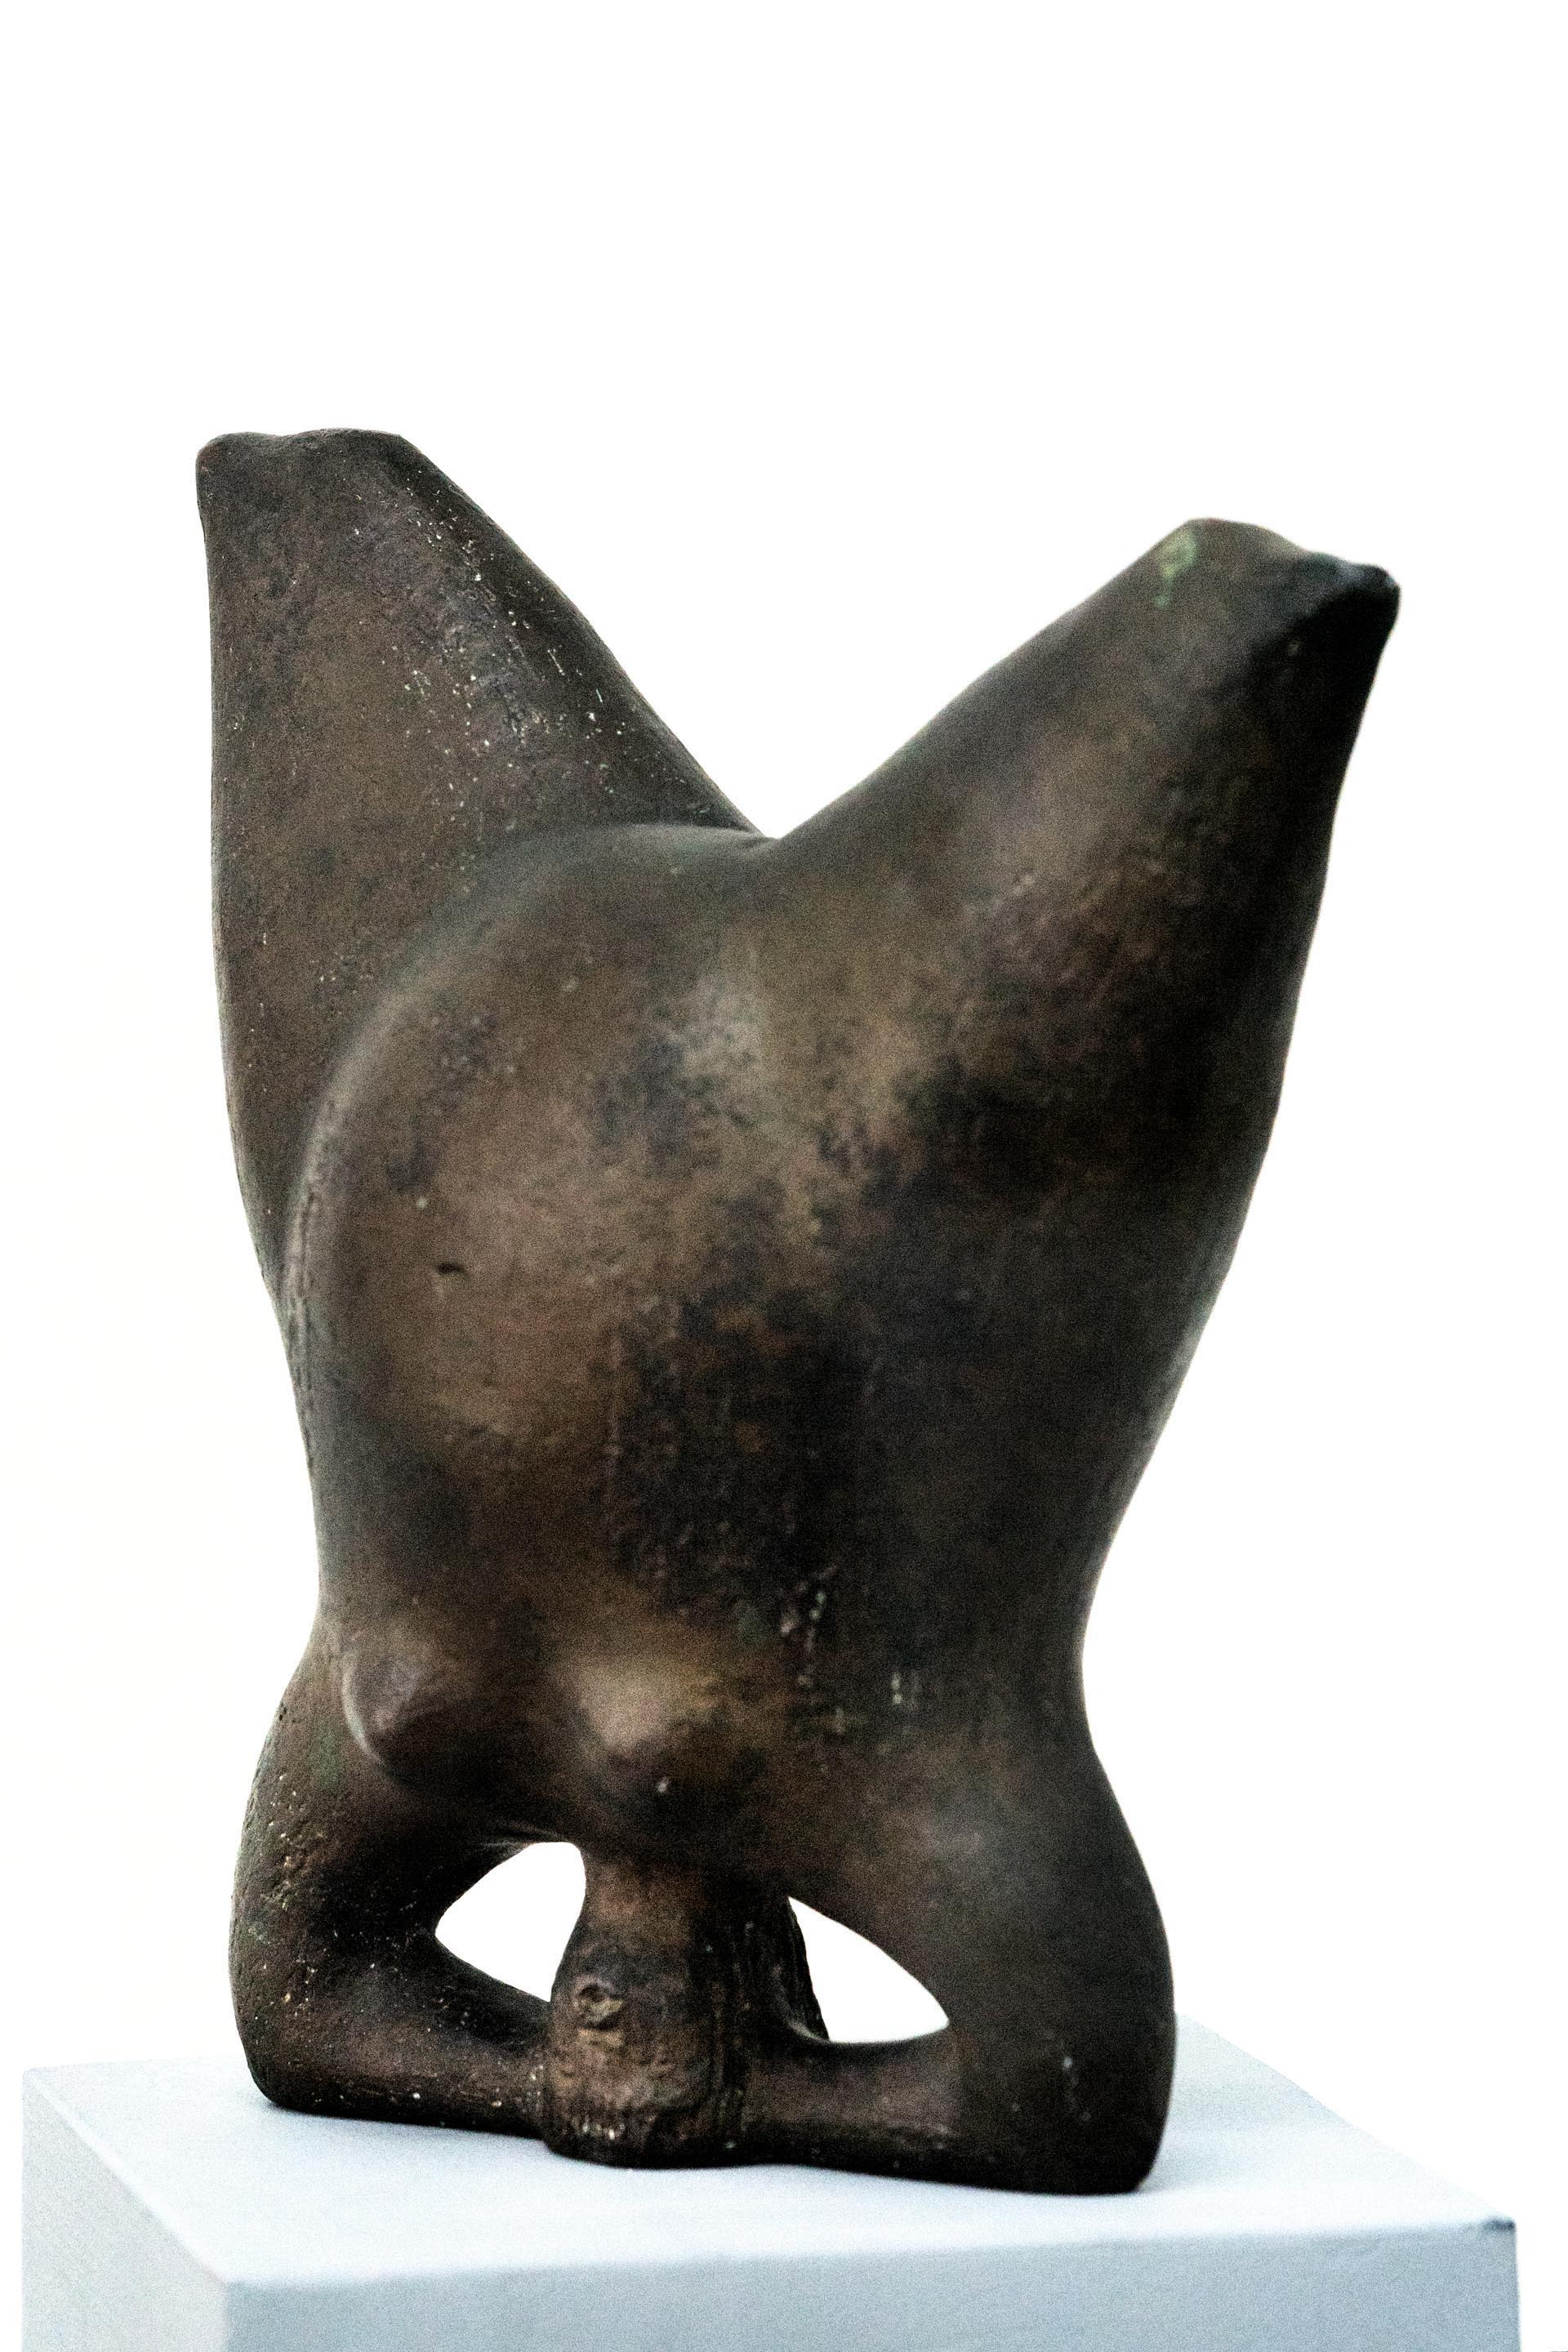 Without title by Doli Hilbert (without year, bronze), private collection. Photo: Andrea Preysing